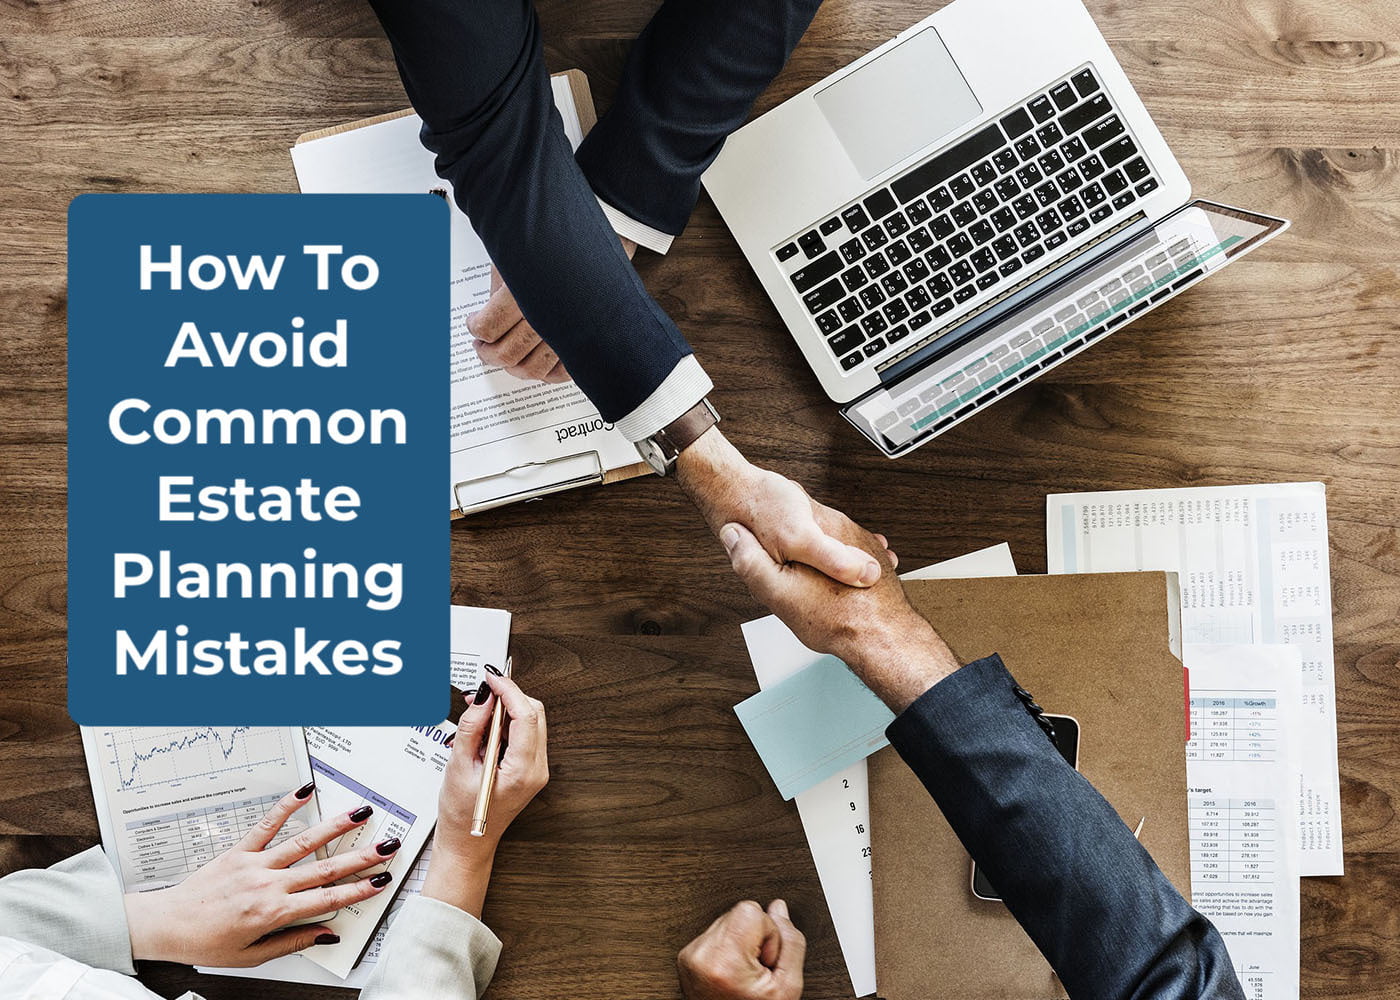 How to Avoid Common Estate Planning Mistakes